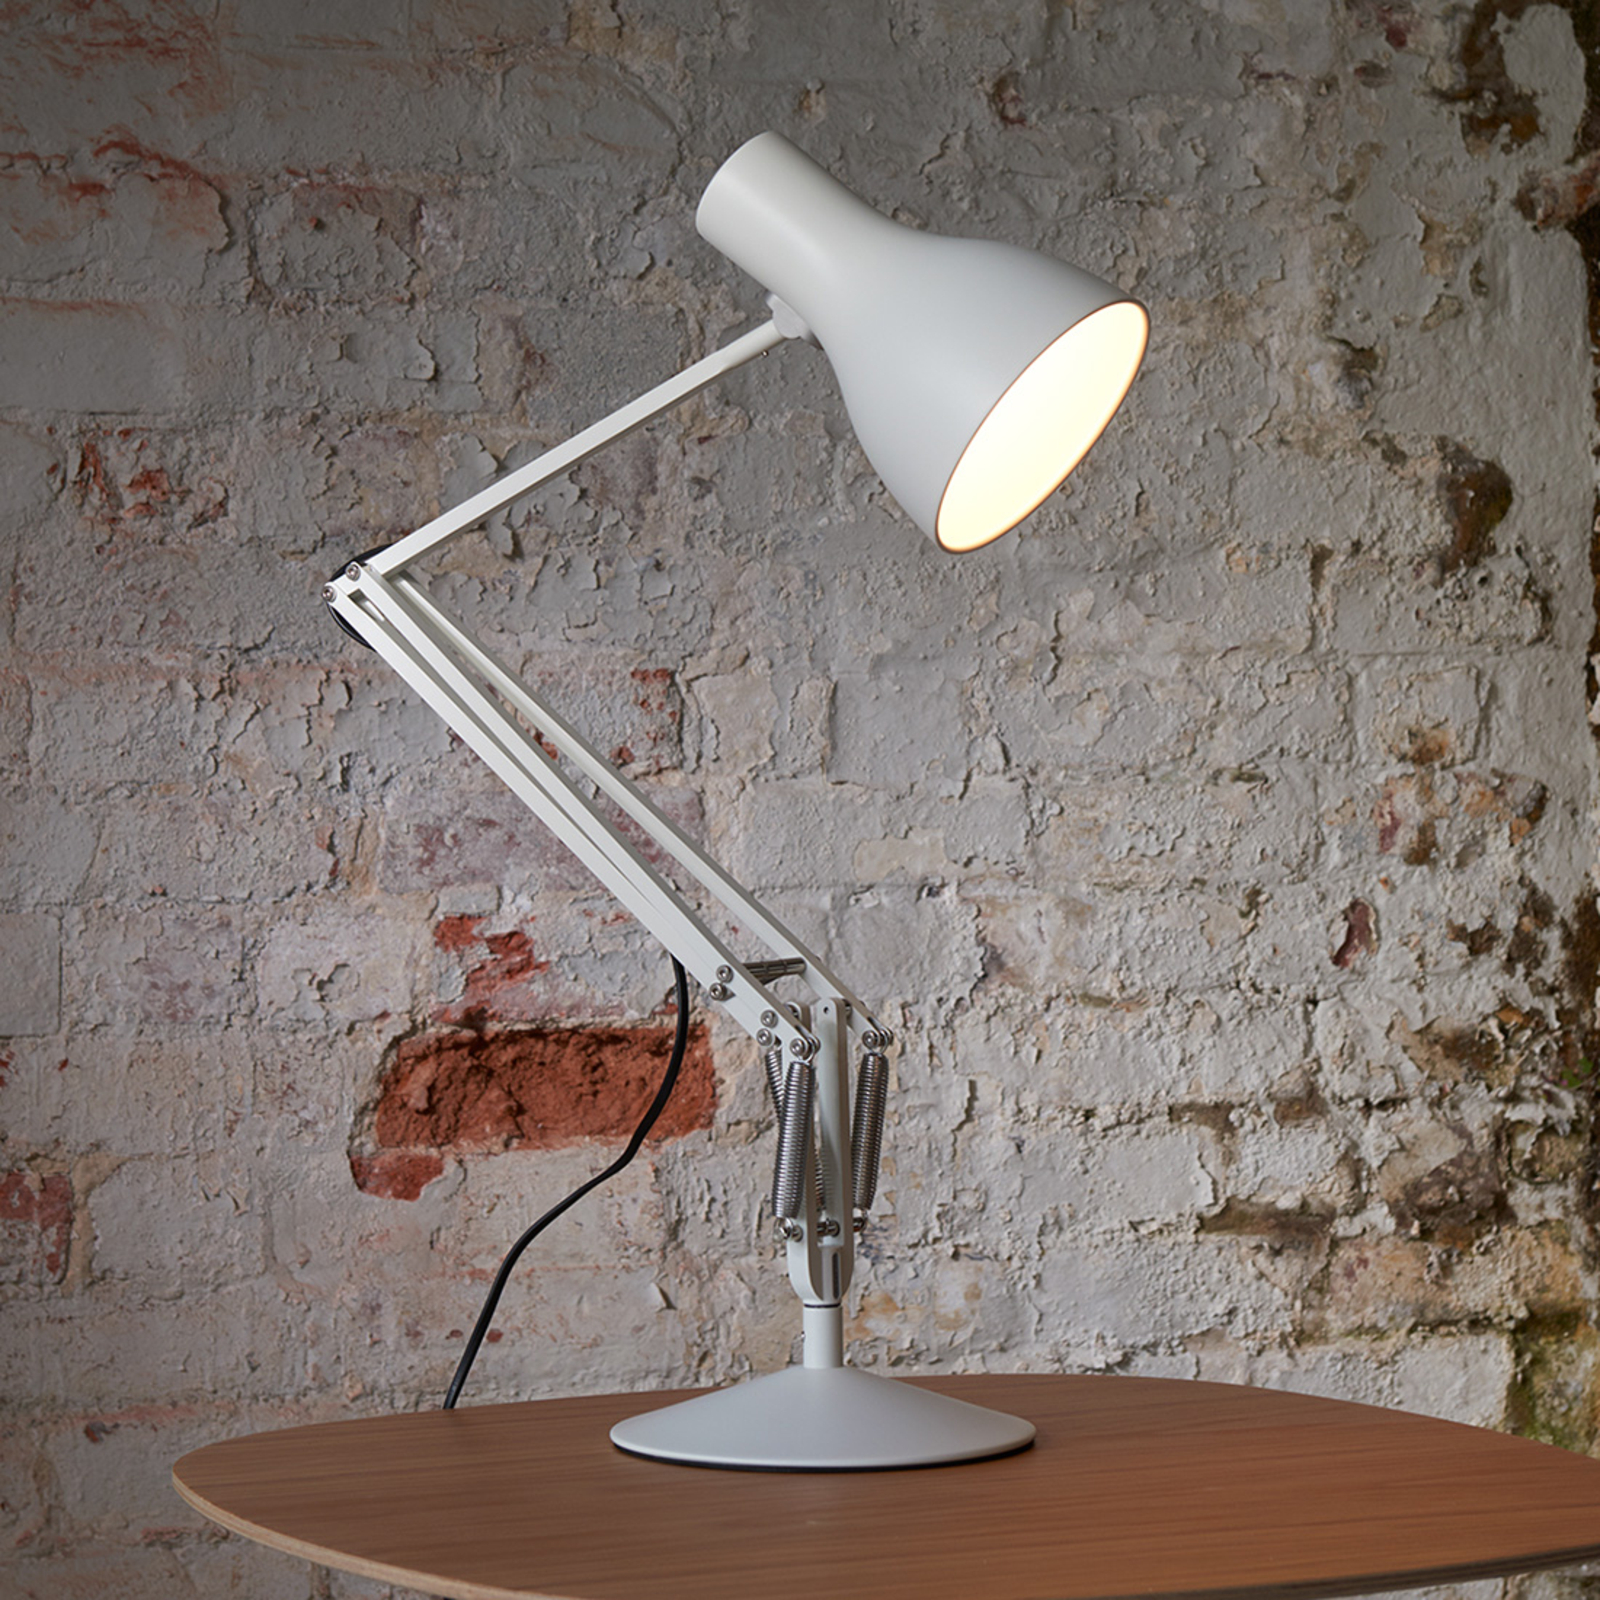 Anglepoise Type 75 lampe à poser, blanc alpin